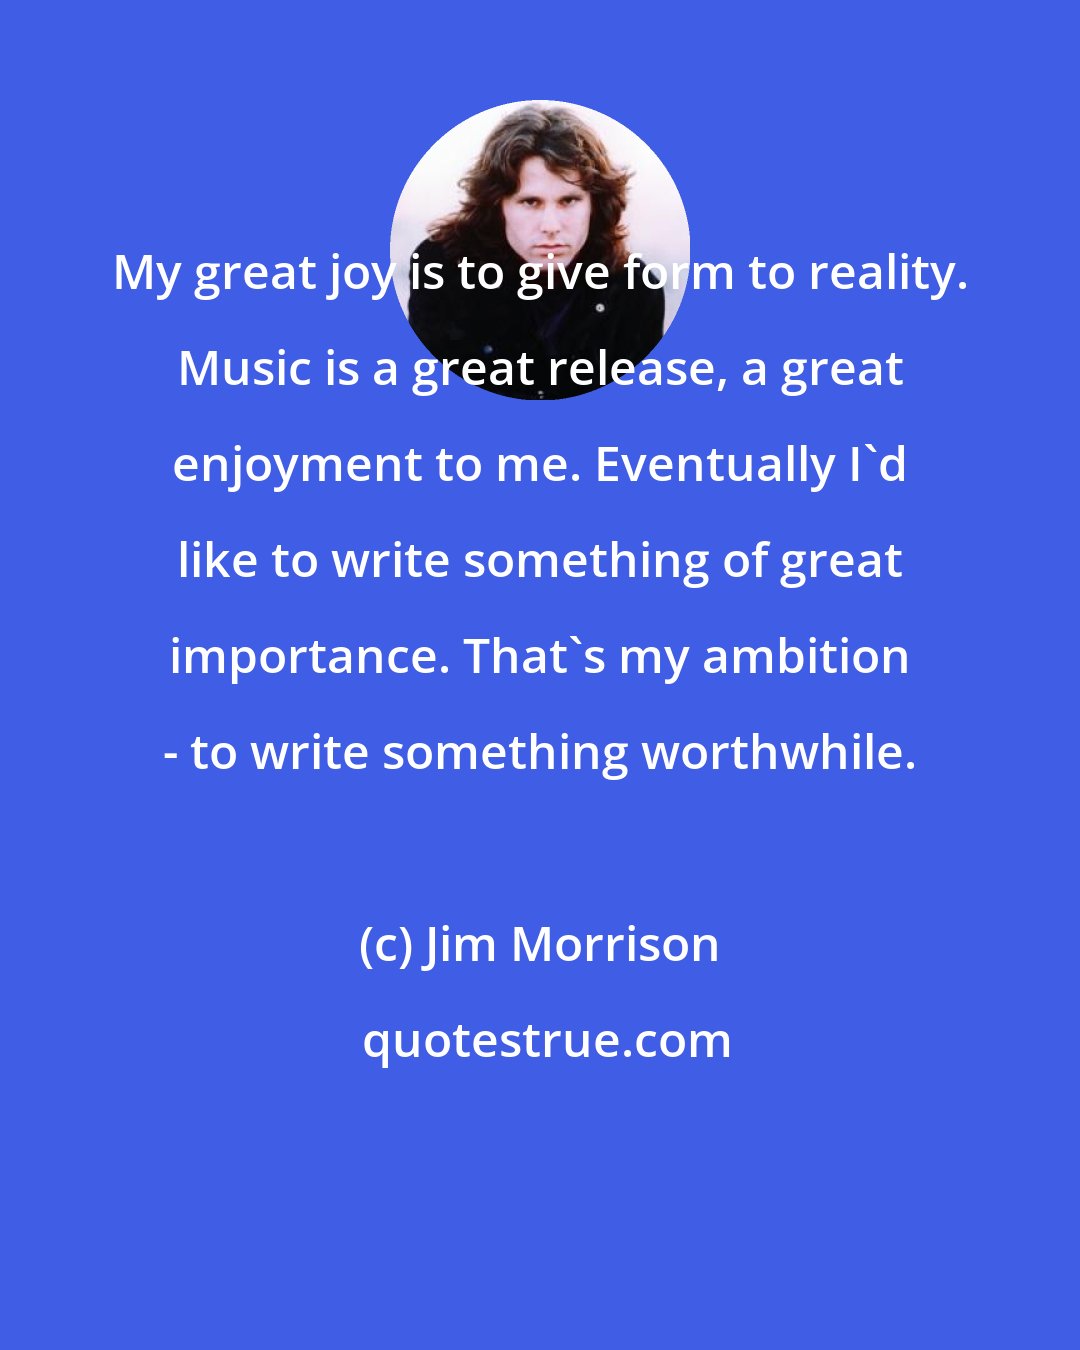 Jim Morrison: My great joy is to give form to reality. Music is a great release, a great enjoyment to me. Eventually I'd like to write something of great importance. That's my ambition - to write something worthwhile.